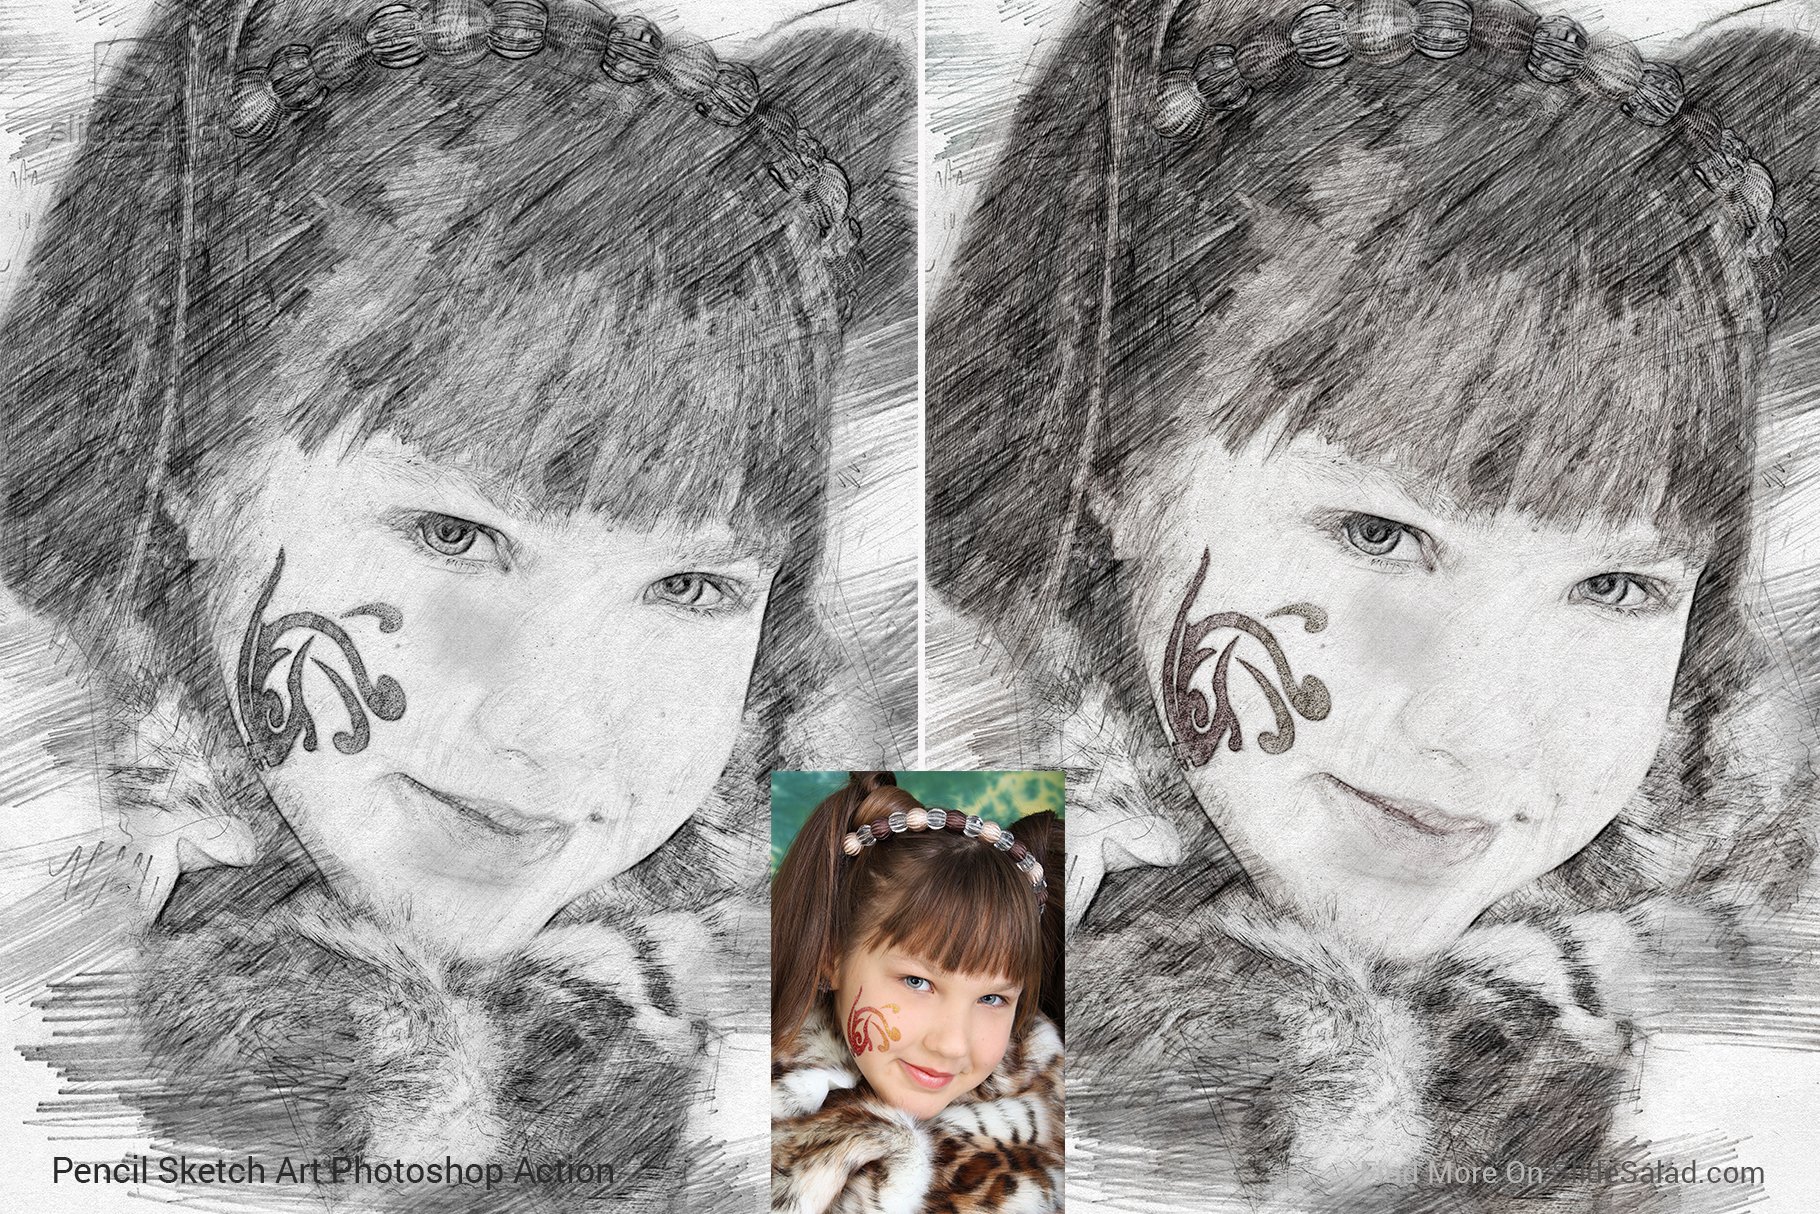 Pencil Sketch Art Photoshop Action - girl portrait example with photo.